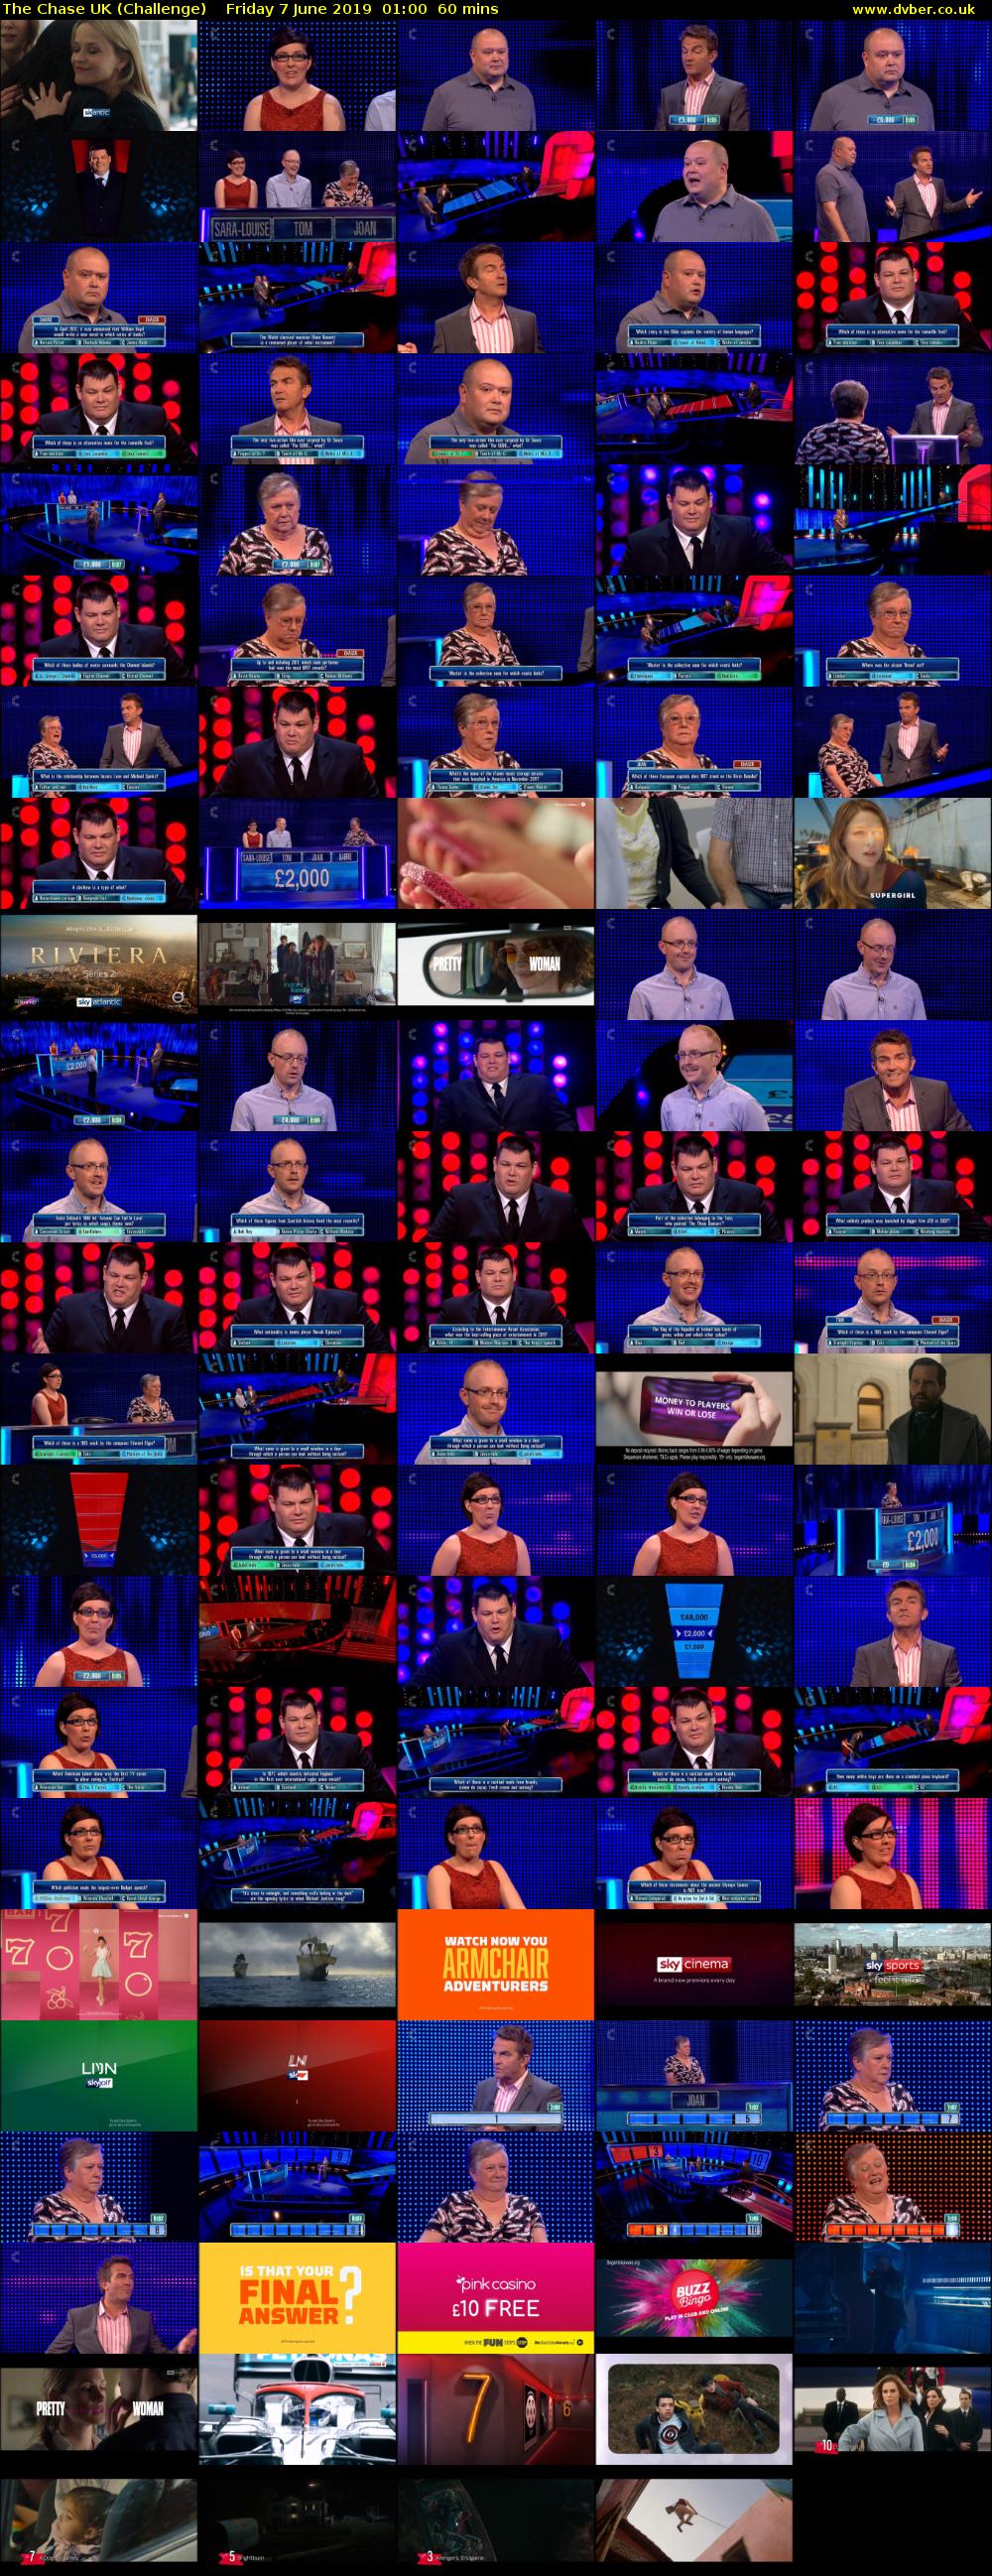 The Chase UK (Challenge) Friday 7 June 2019 01:00 - 02:00